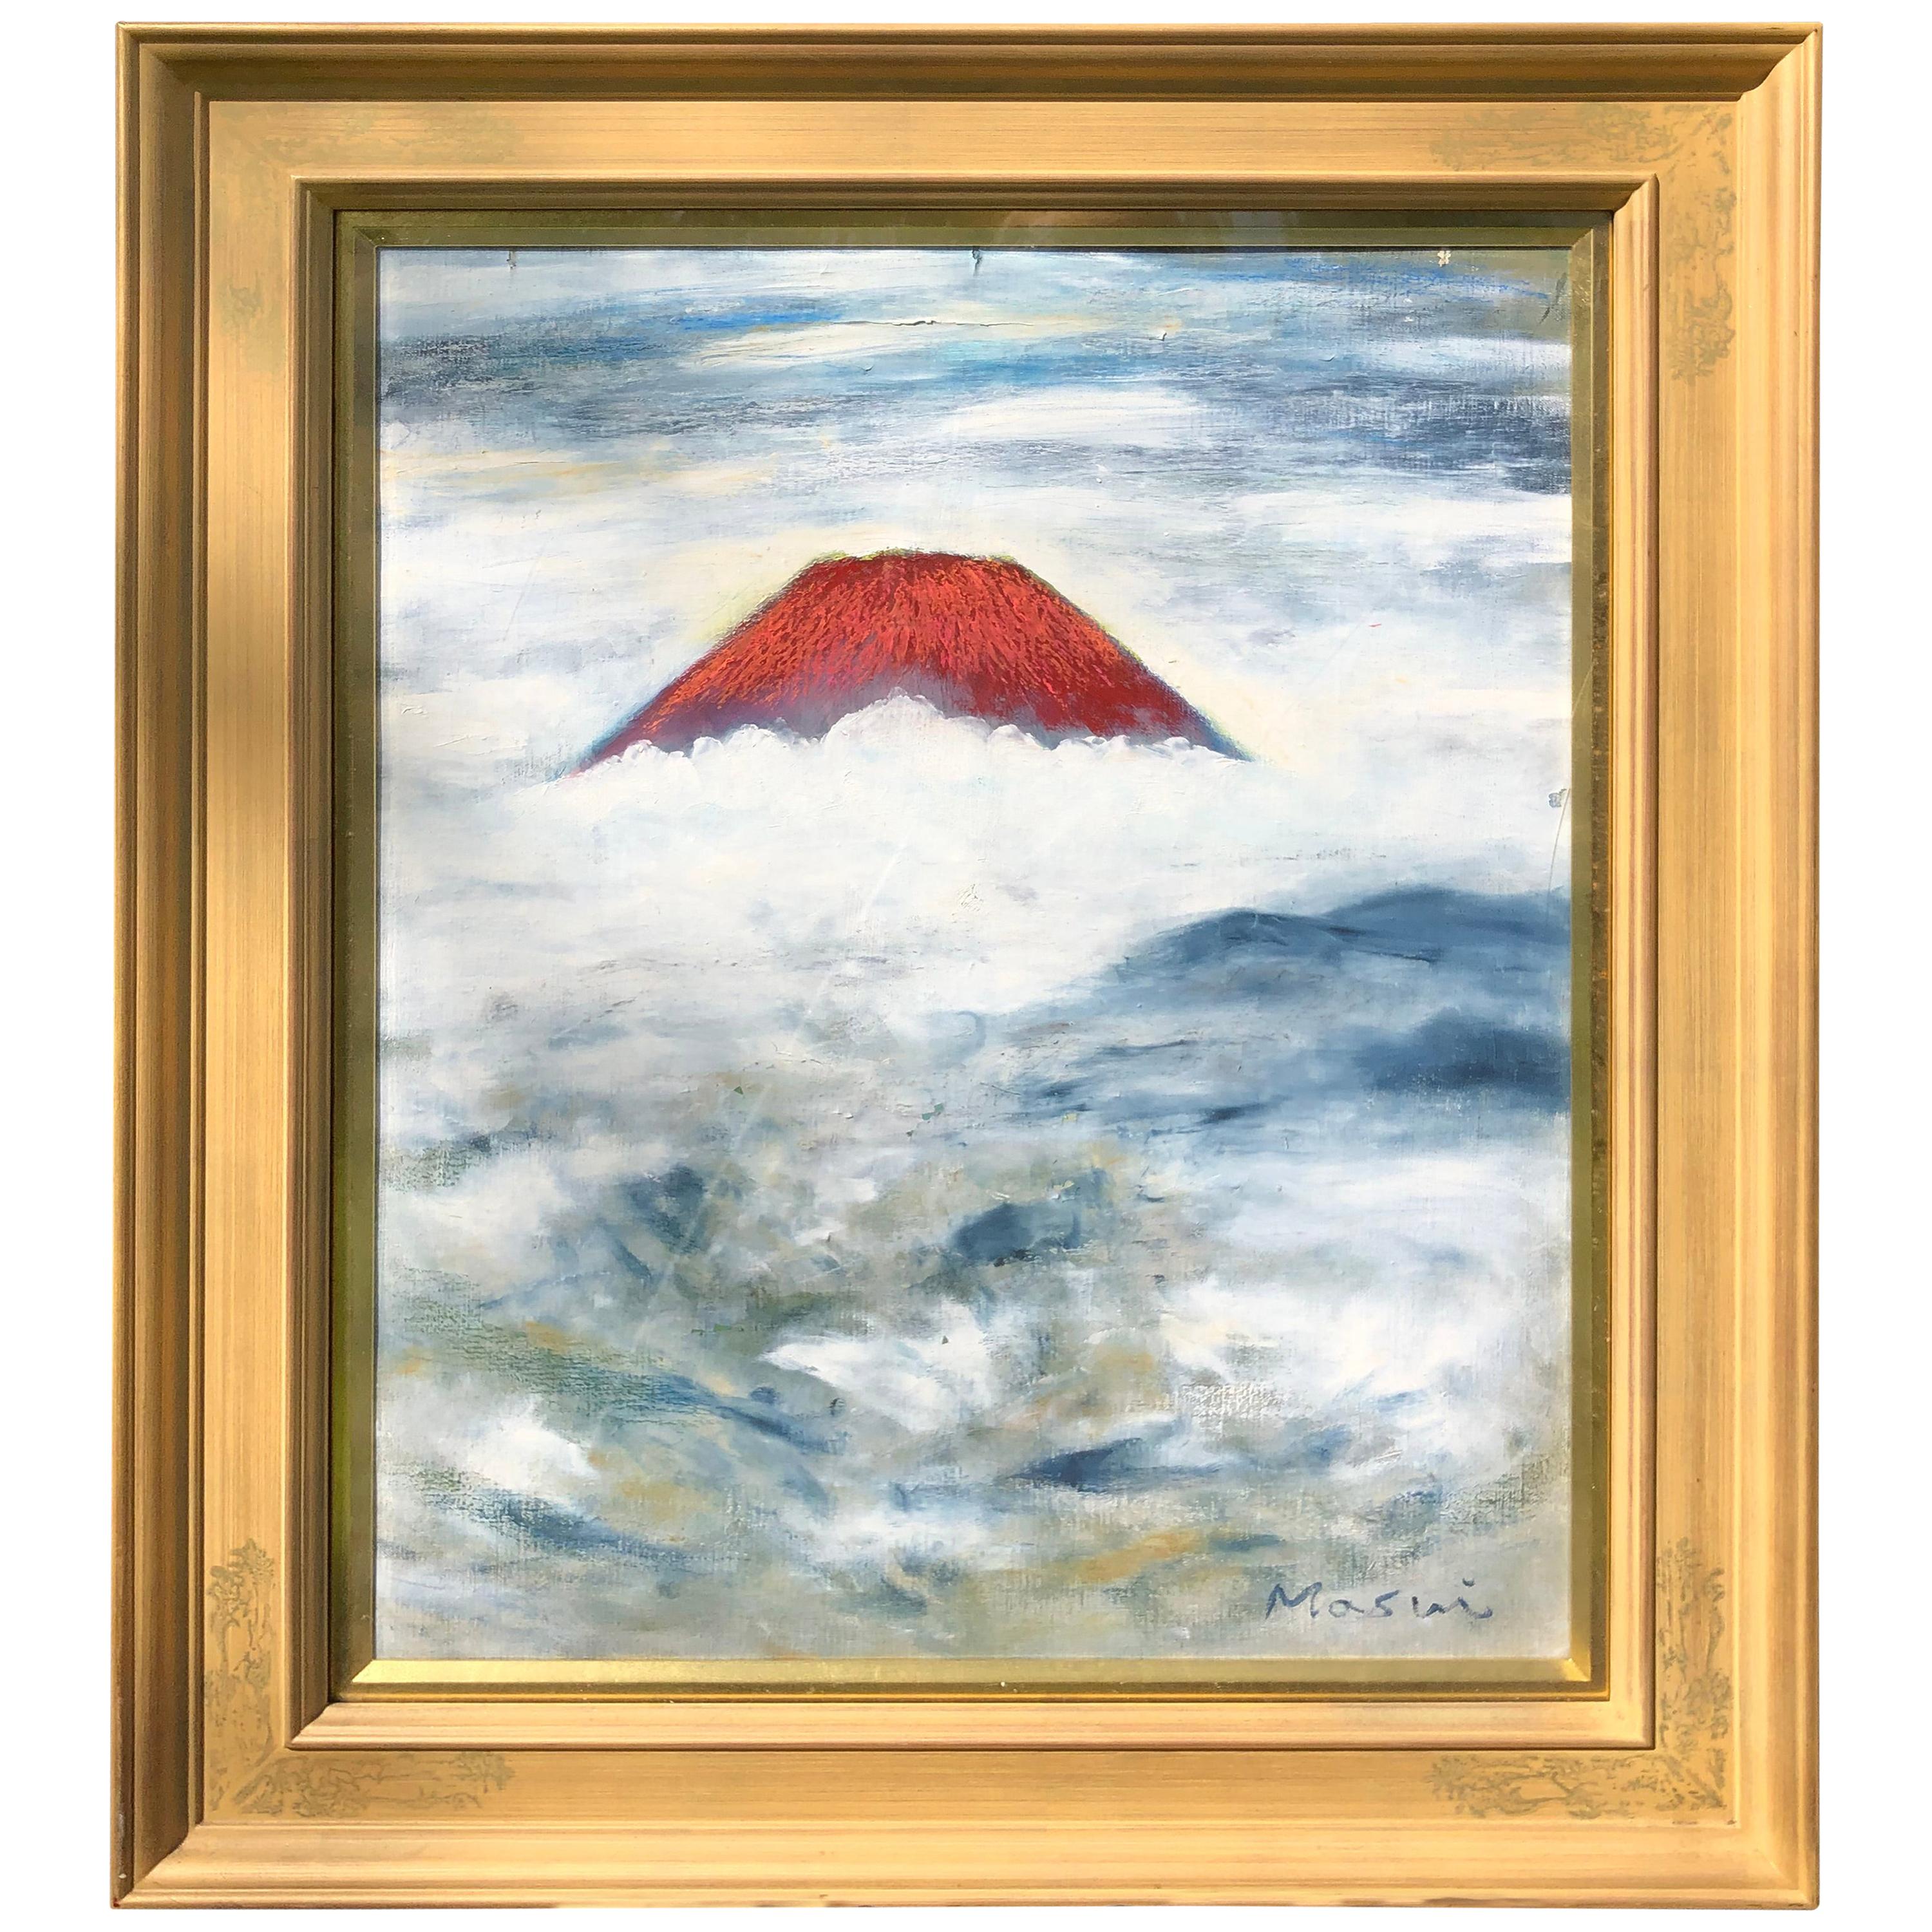 Japanese Stunniing "Red Mount Fuji Among Clouds" Oil Painting Signed Masui